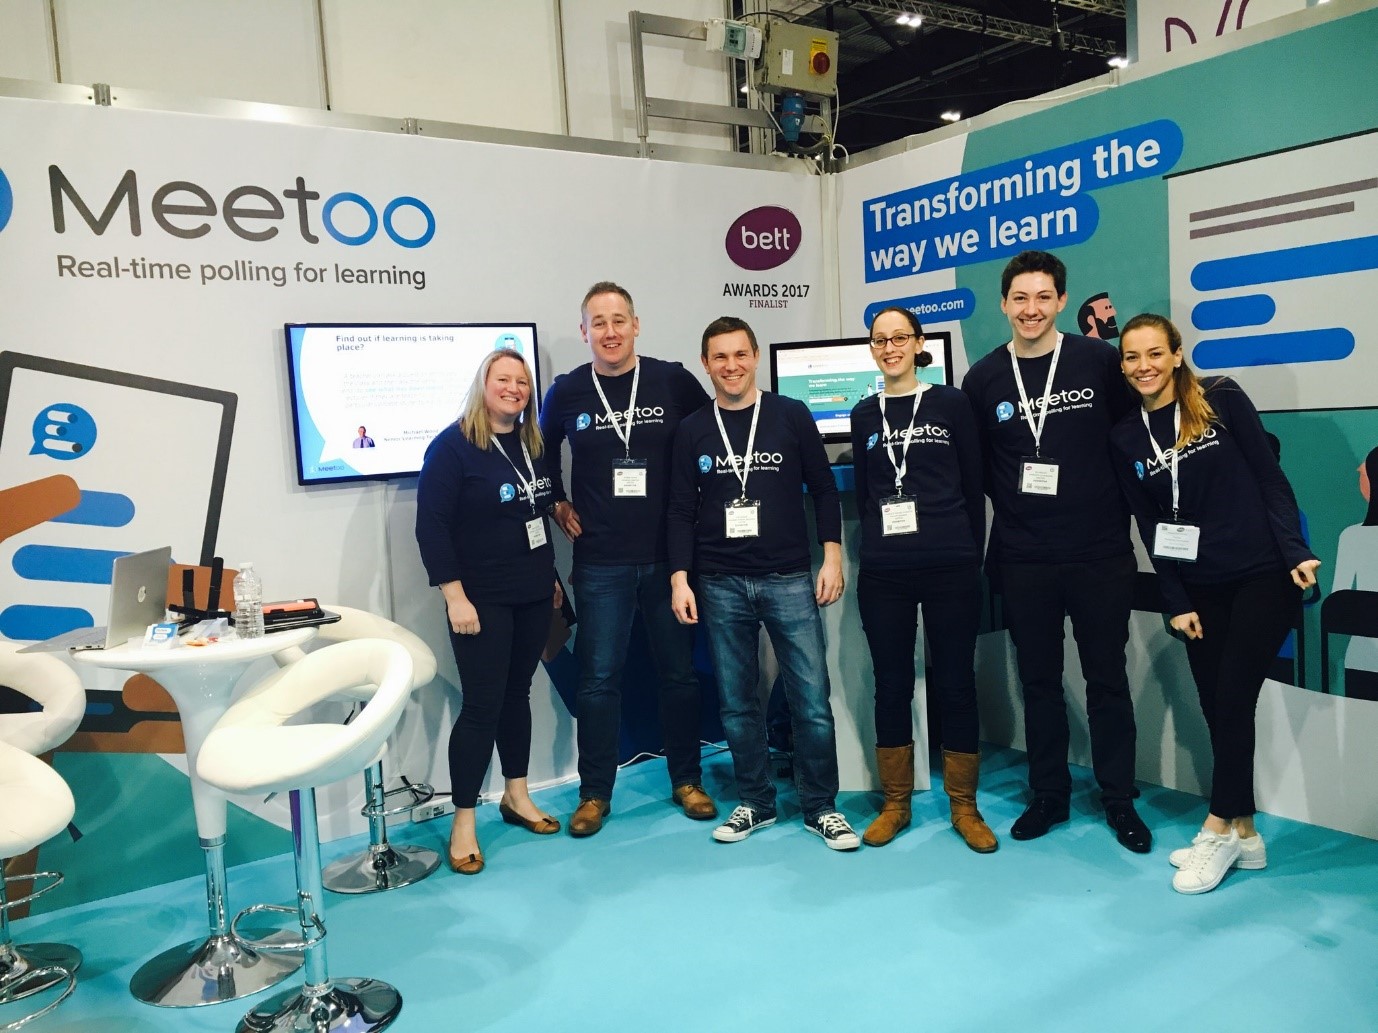 BETT 2017 – We’ve come a long way in a year!